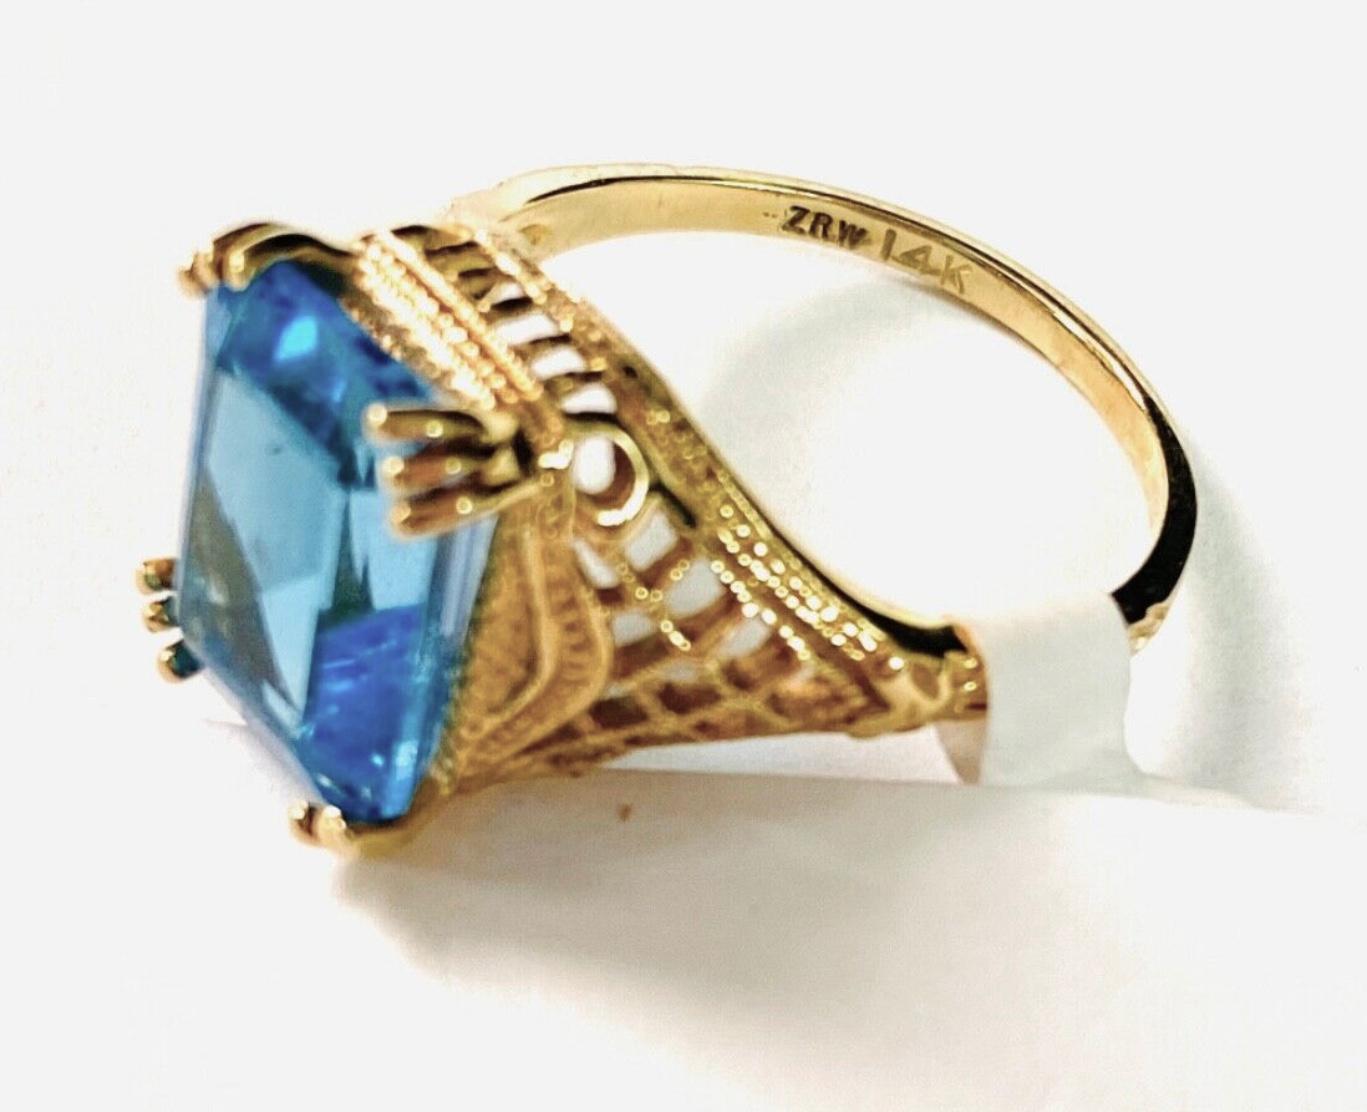 14k yellow gold Blue Topaz ring, 4.11 Grams TW. The dimensions of the approximately 11.5 mm x 8.5 mm.
Marked 14k. Approximate size 6.5